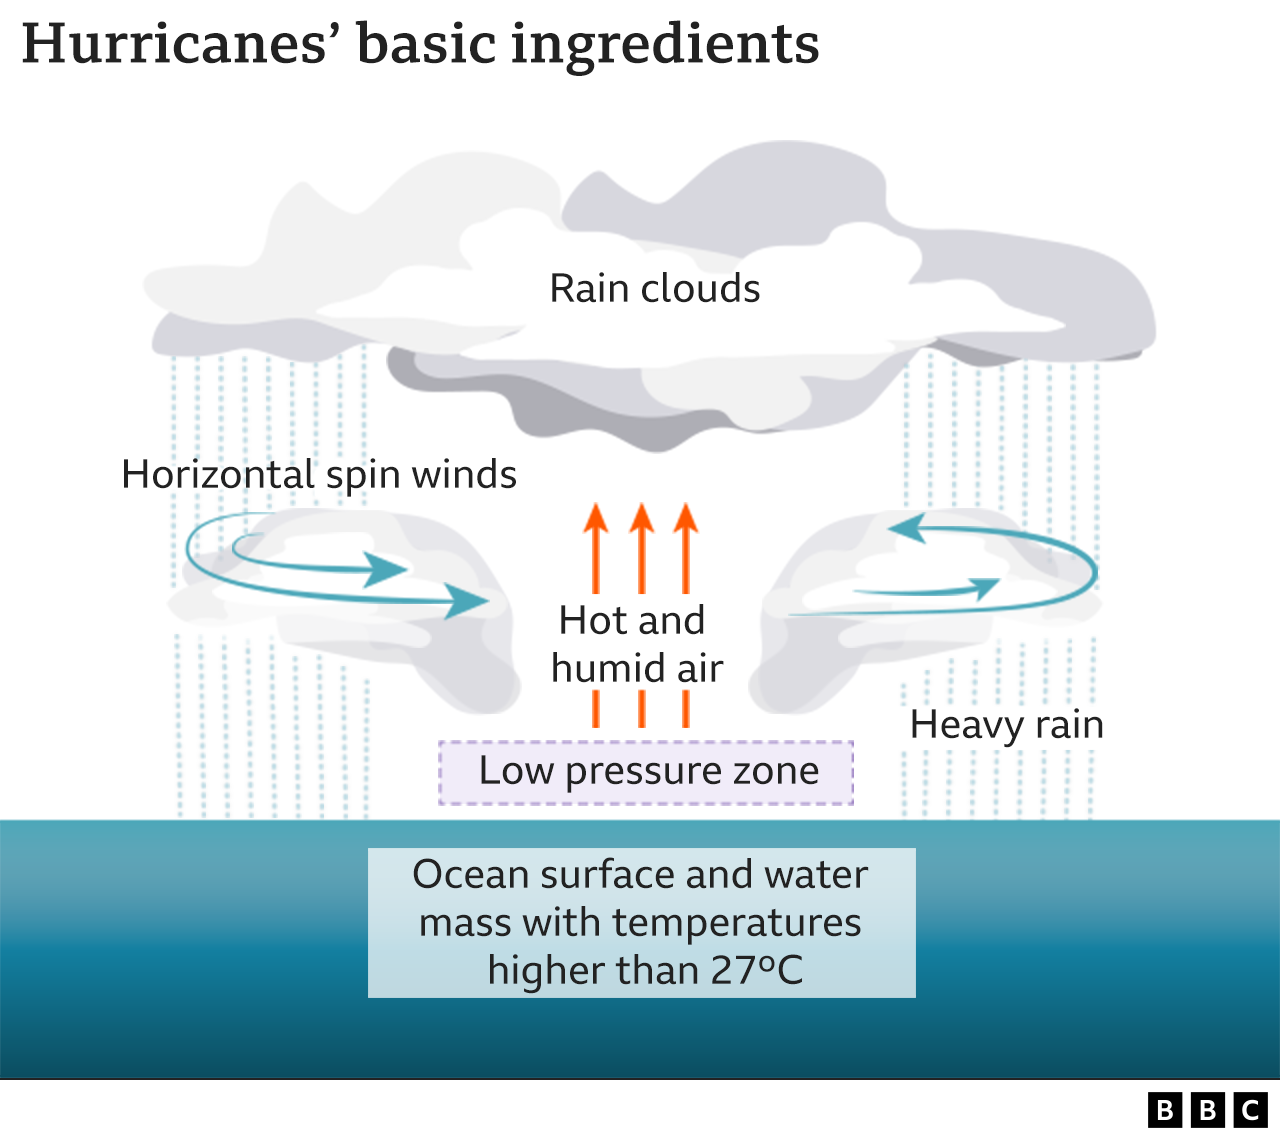 Graphic of ingredients typically needed for a hurricane. They include ocean surface waters warmer than 27C, and horizontally spinning winds.